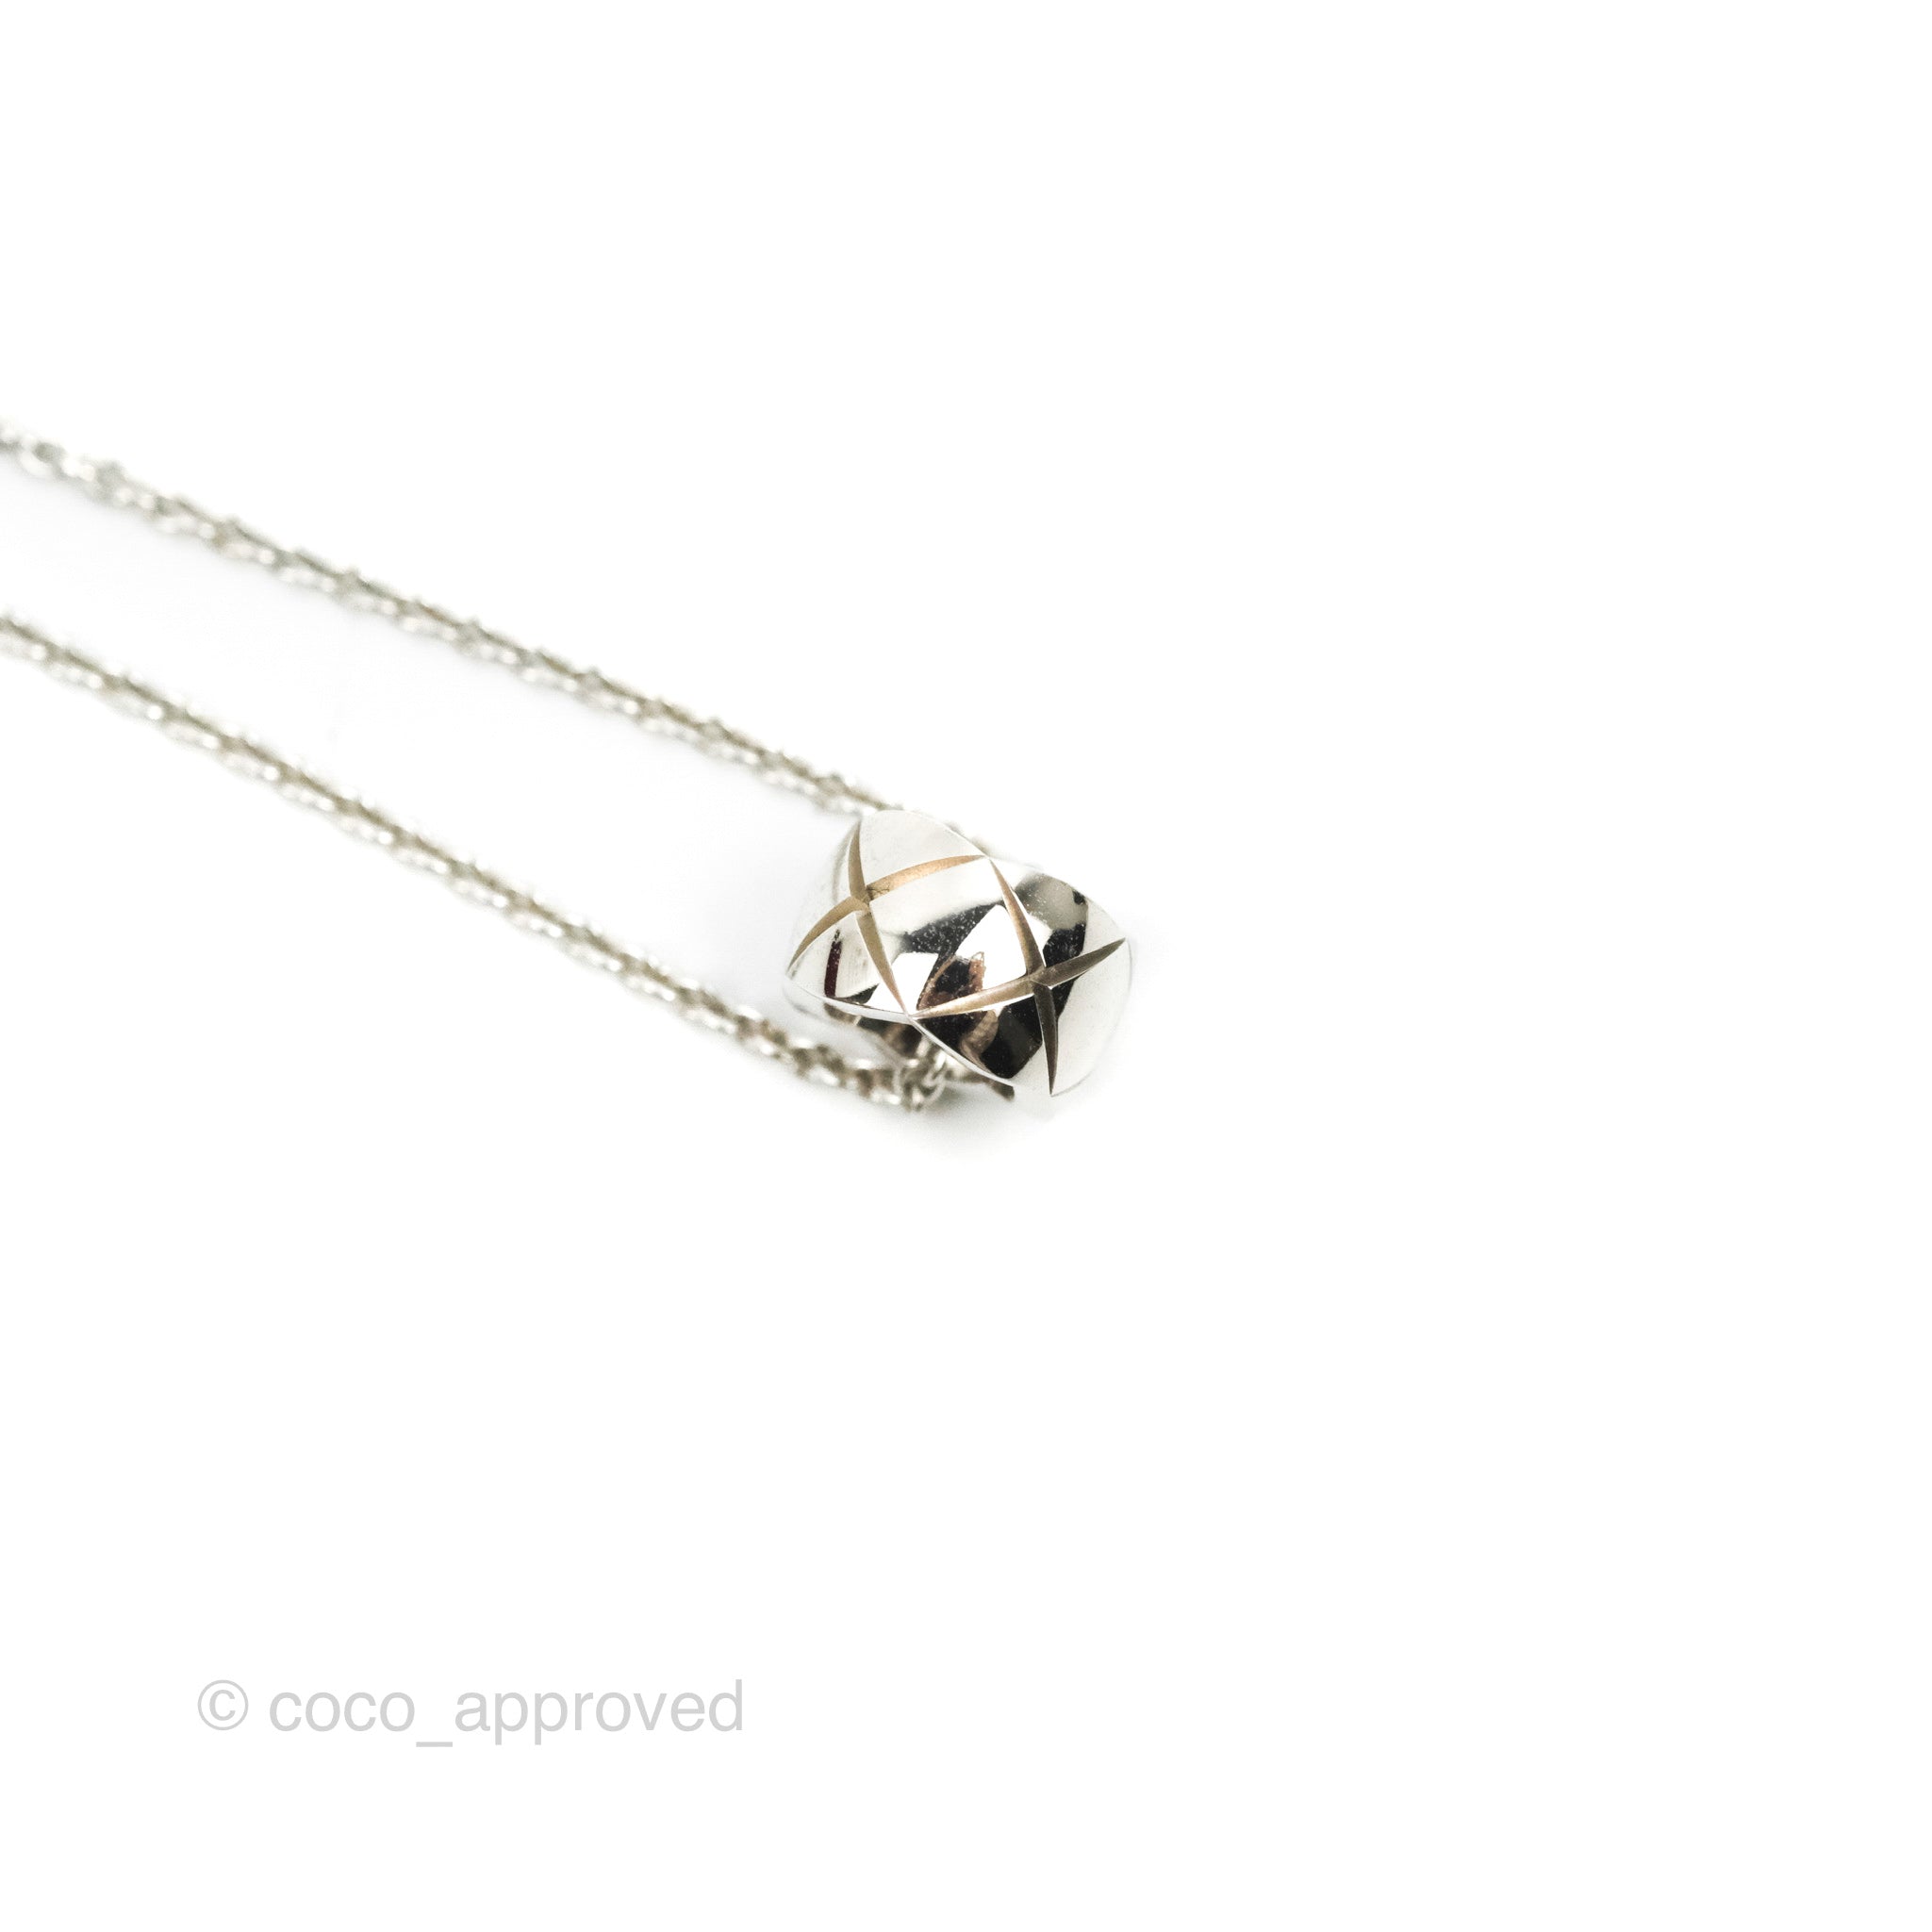 Chanel COCO CRUSH Necklace 18K White Gold With Diamond Pendant  J11357-CJbrand Jewelry & Watch